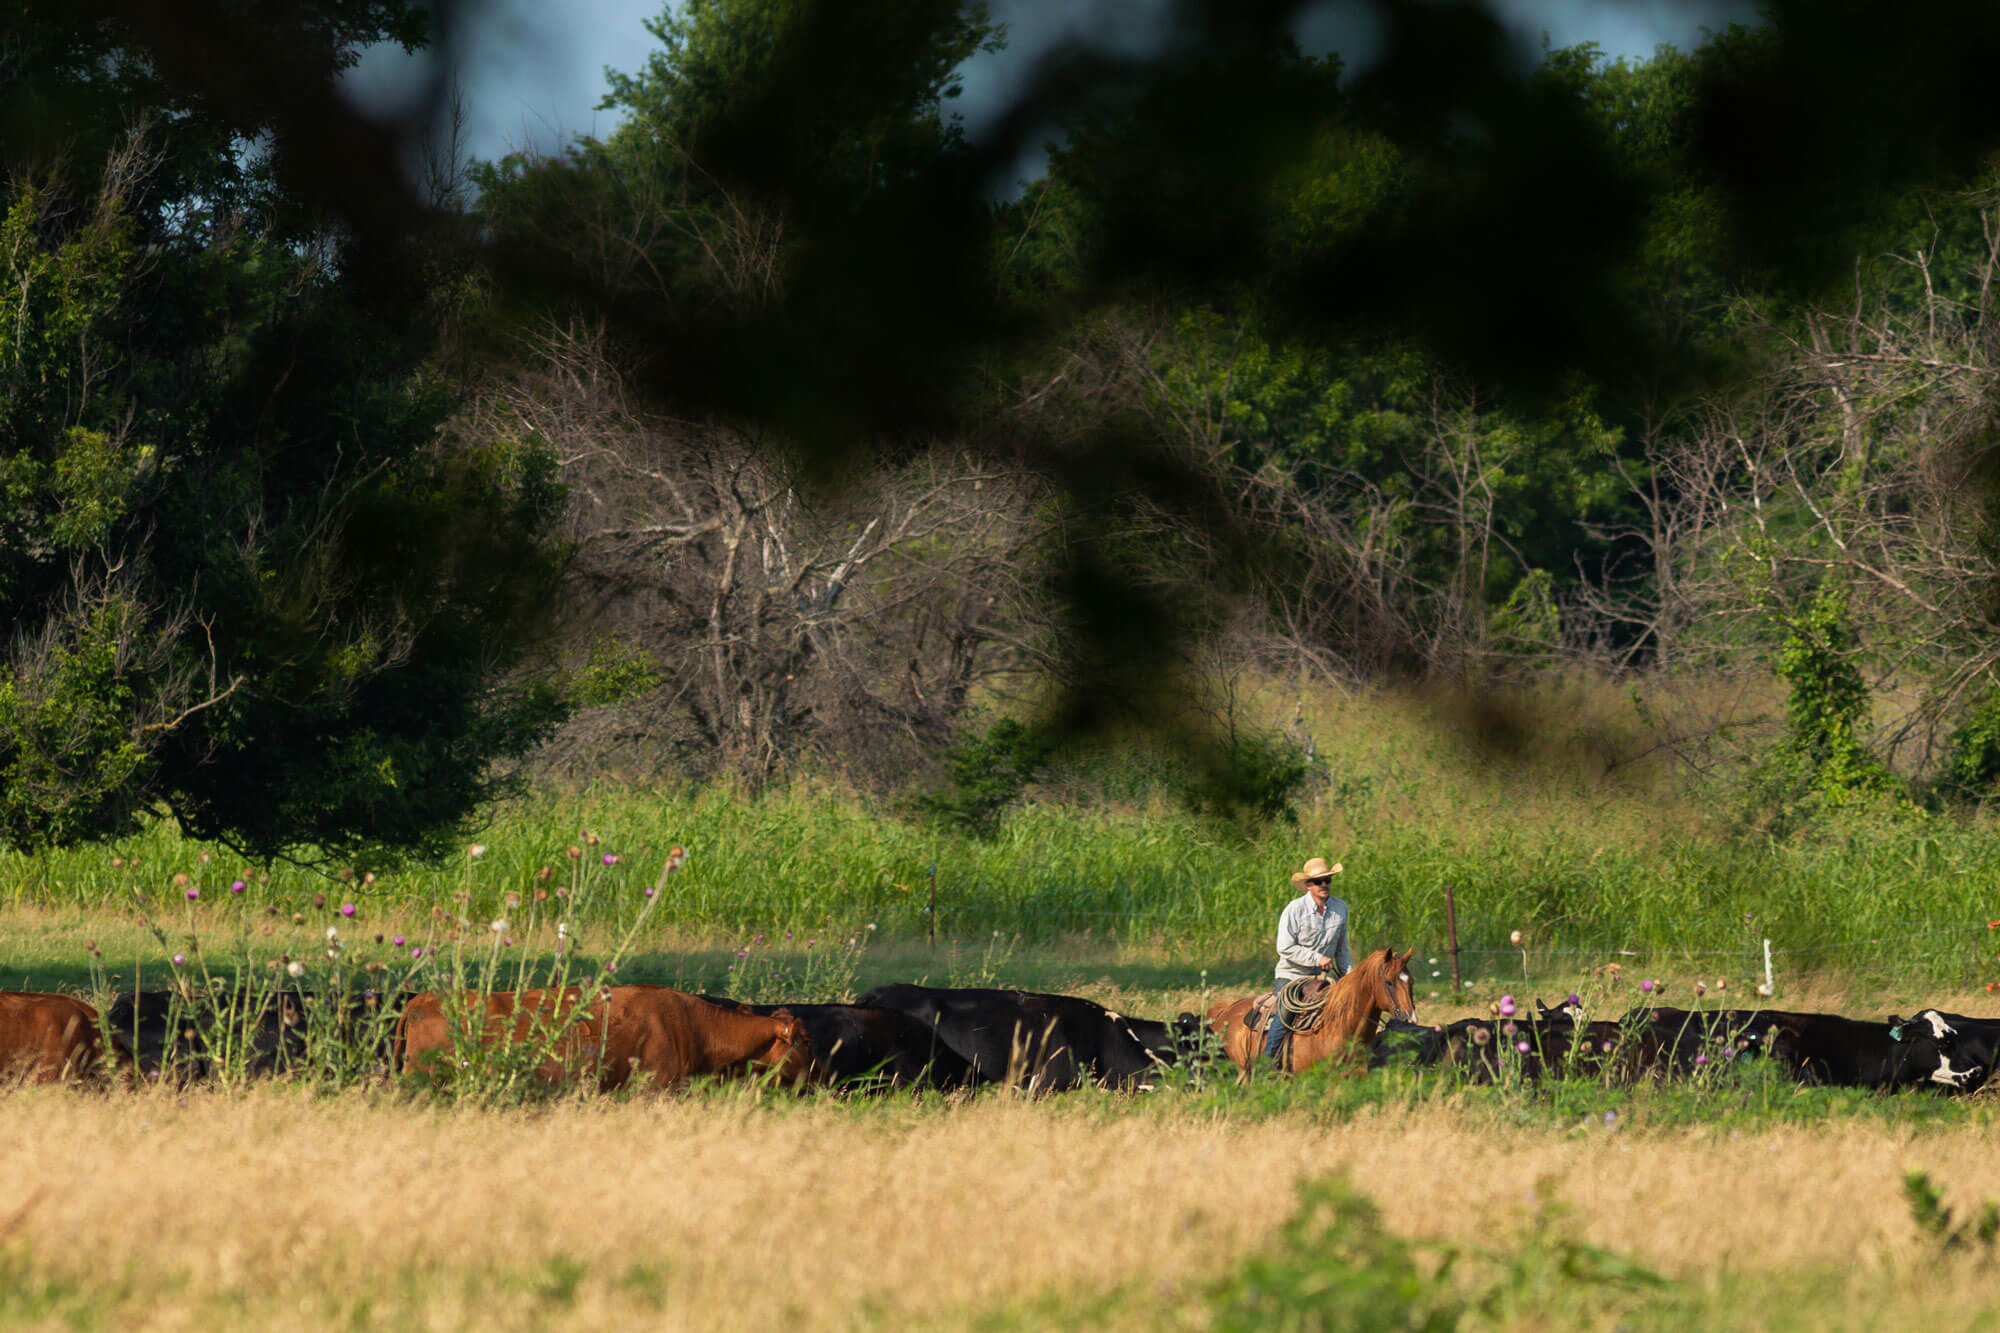 Rancher working with cattle in a pasture lined with trees